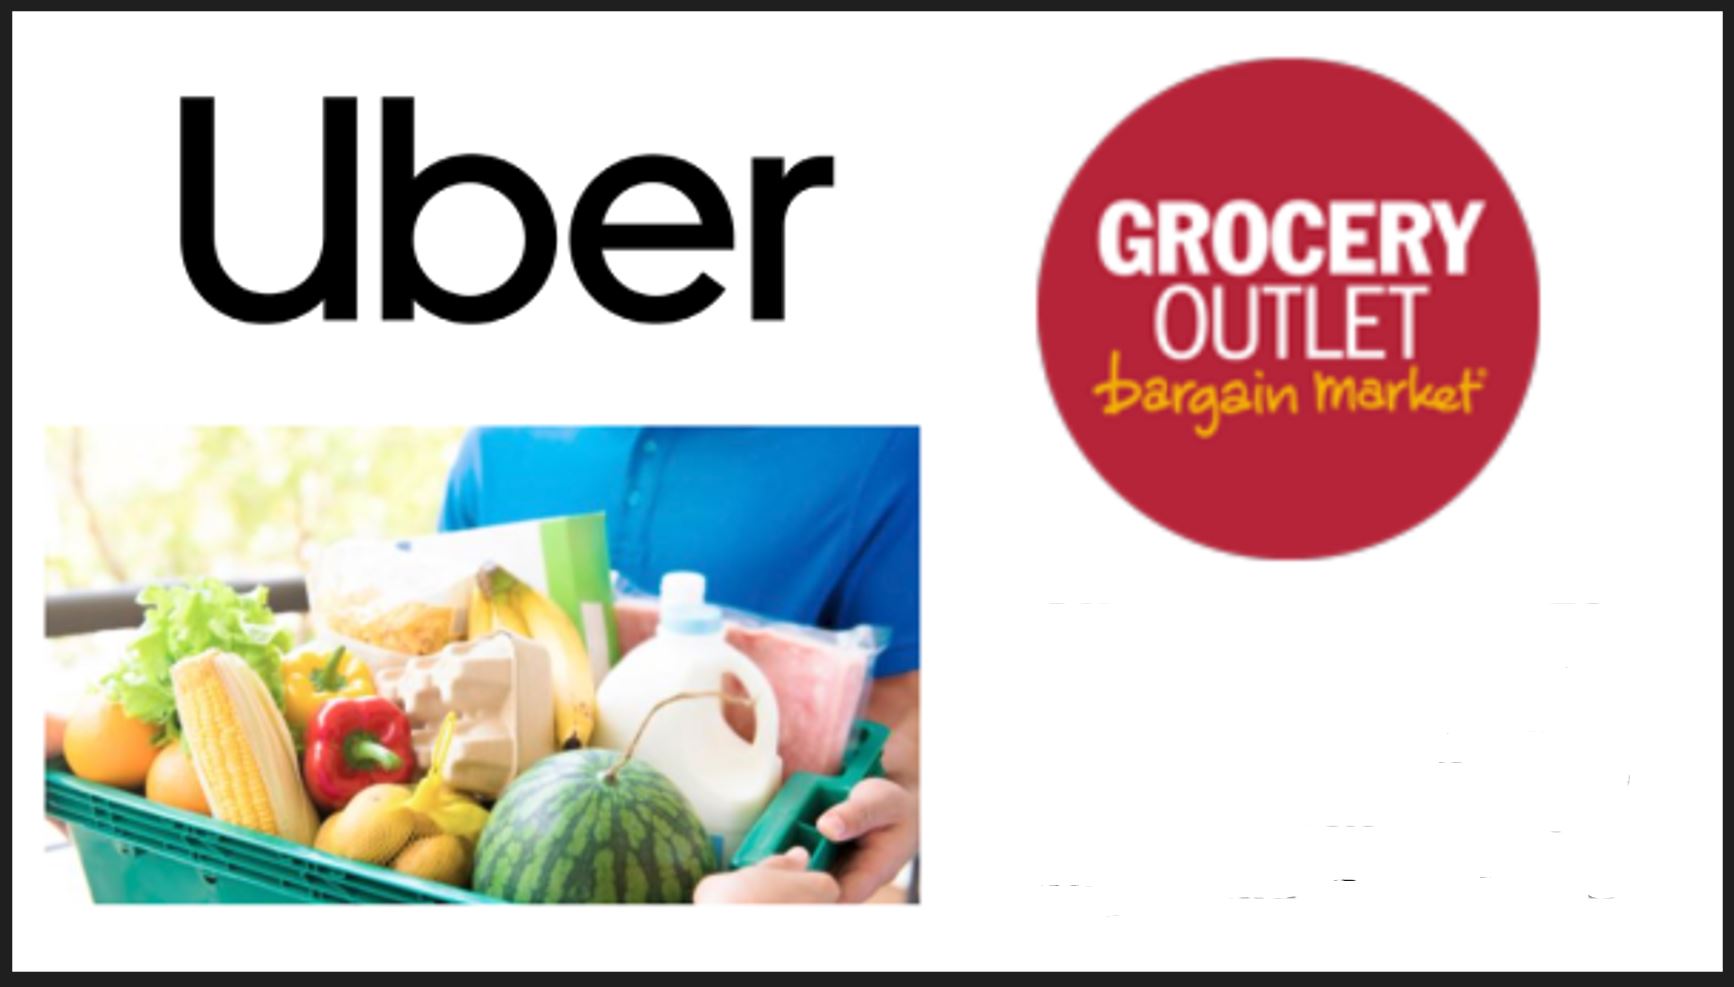 uber grocery outlet